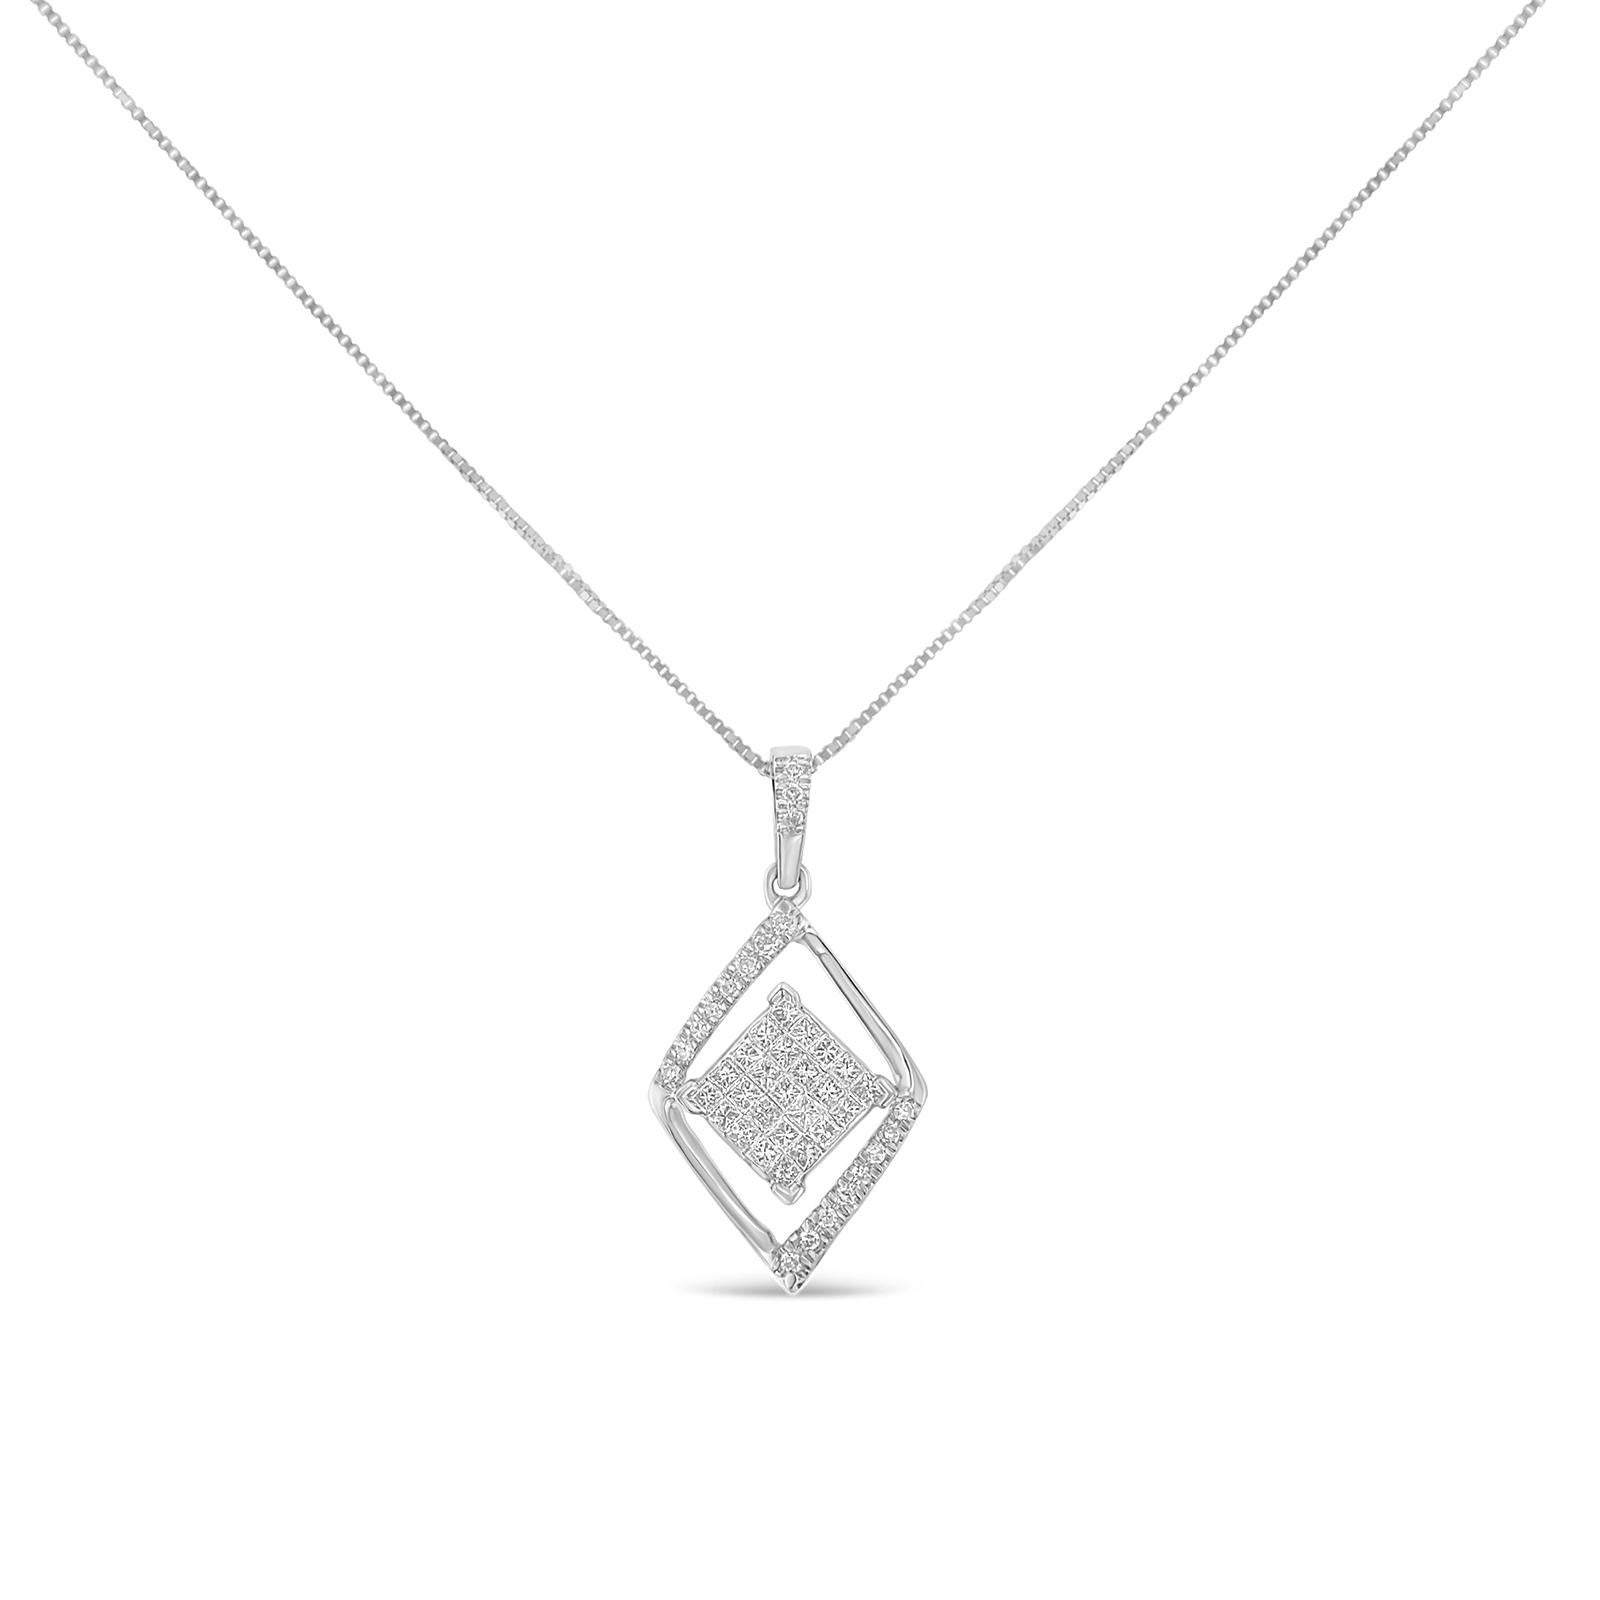 This geometric double rhombus necklace is set with 1/3 cttw of natural, beautiful diamonds. Sure to shine on your neck, this pendant is designed with the finest 10k white gold. Boasting a total diamond weight of 1/3 cttw, this piece will be a